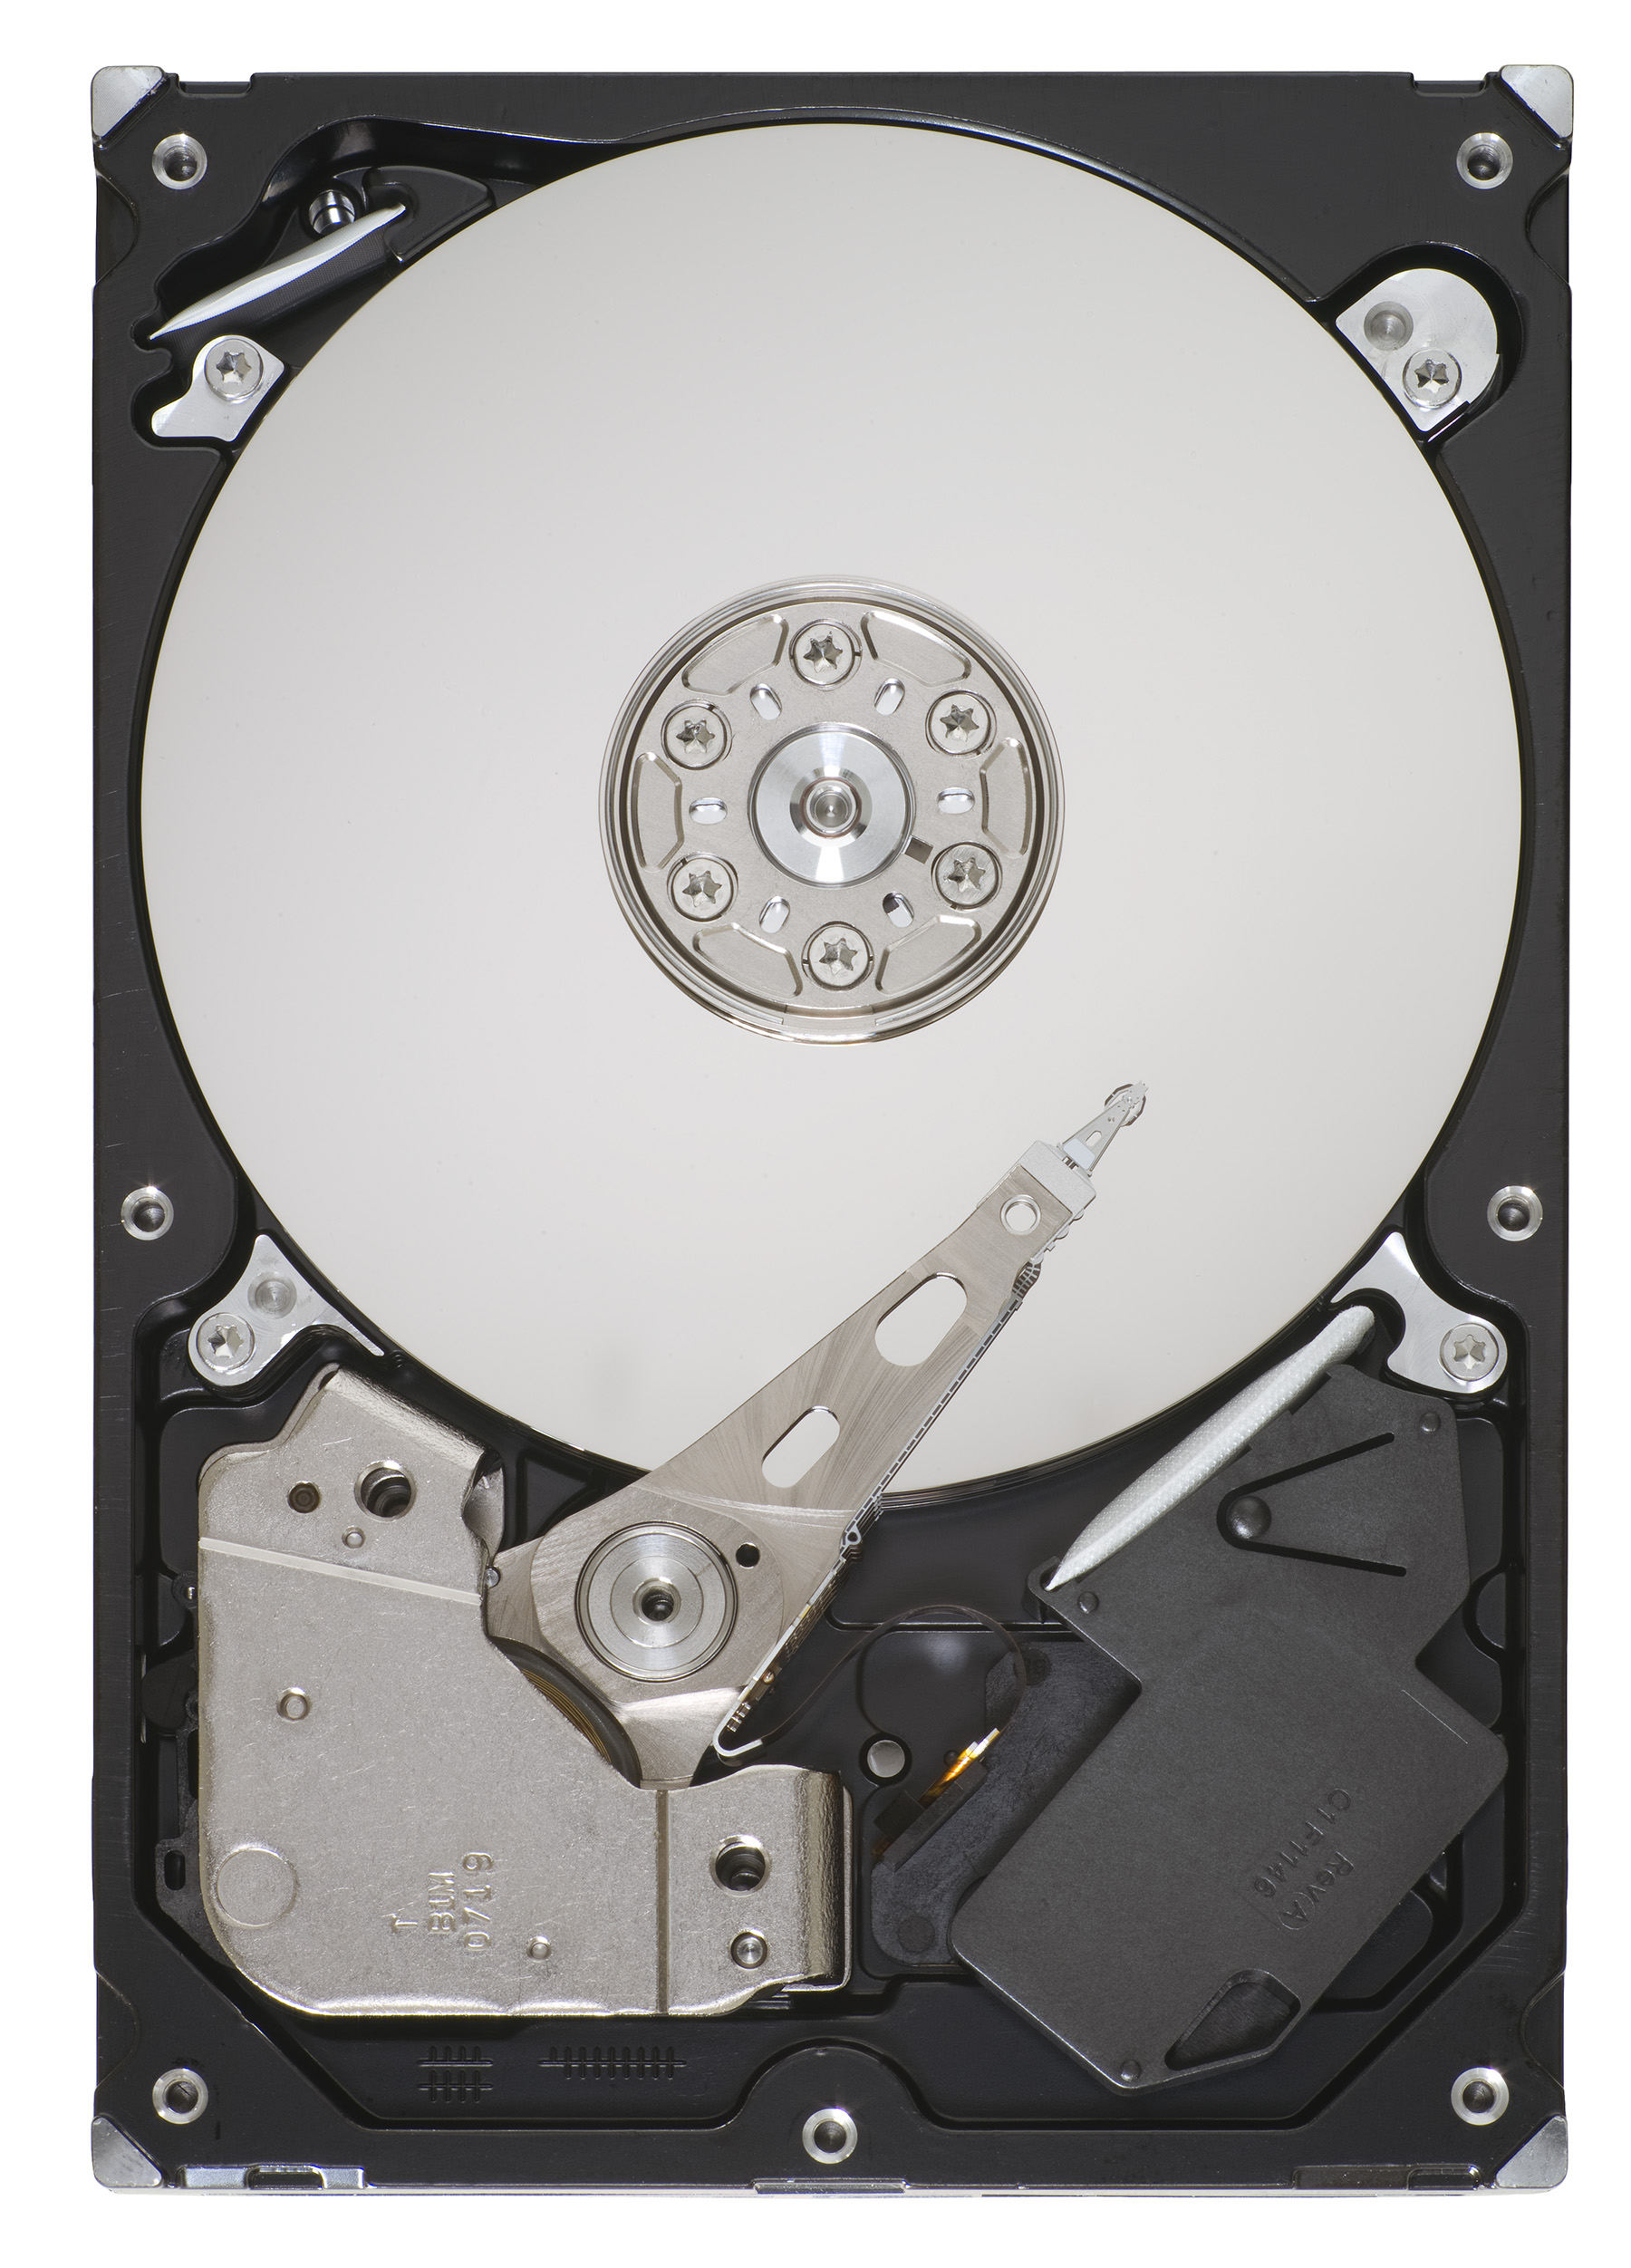 Seagate's Barracuda LP sports 5900 rpm performance and low power 